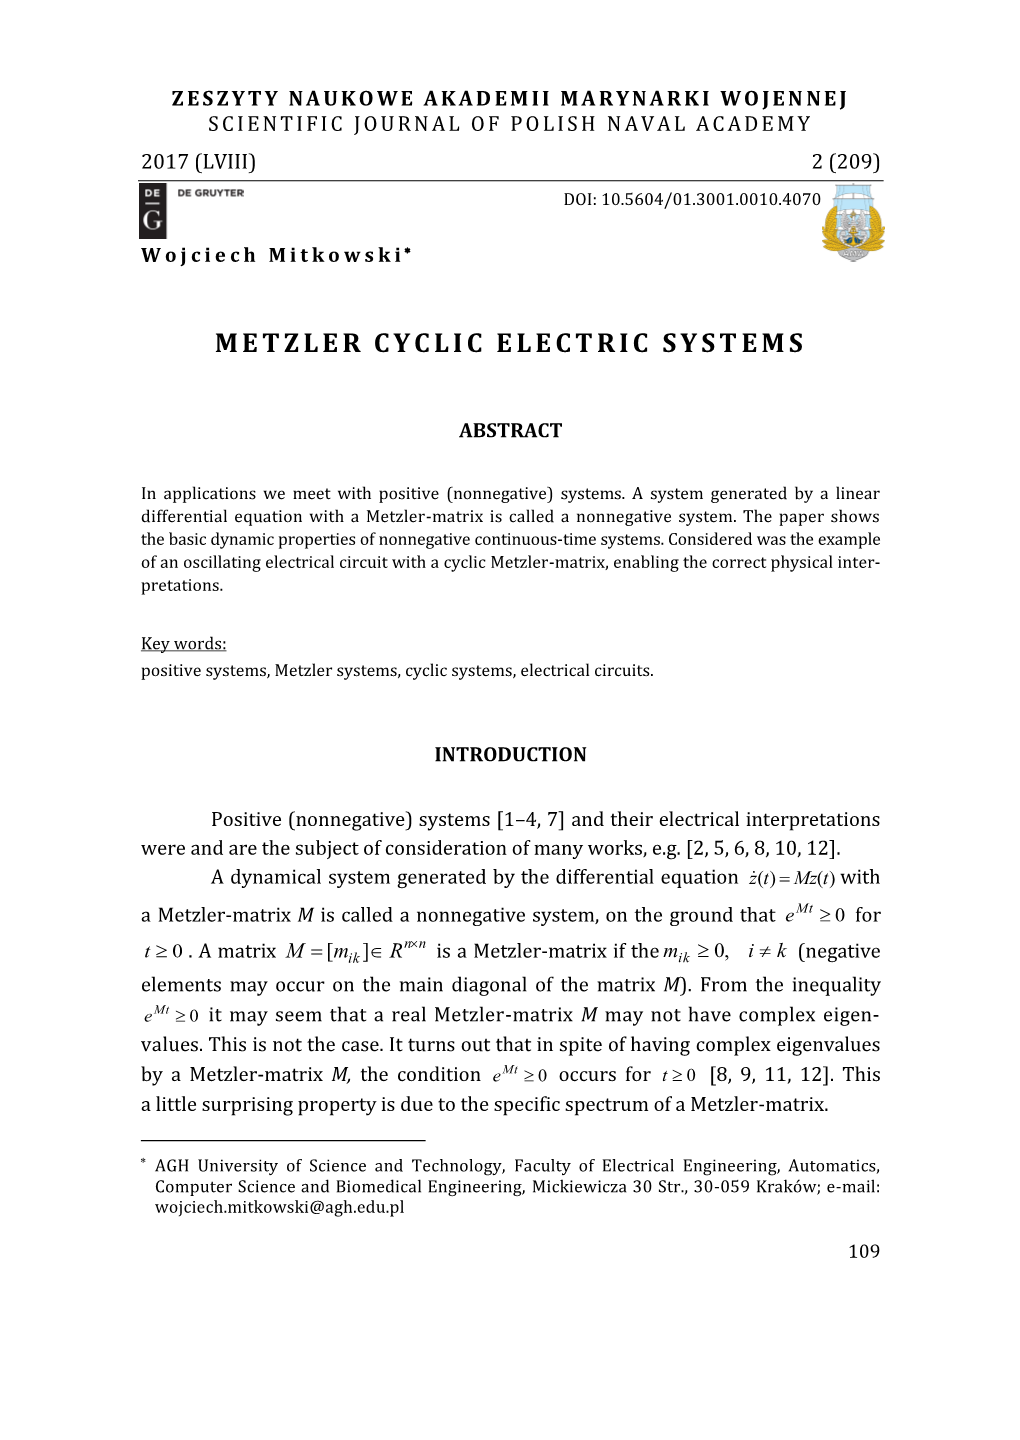 Metzler Cyclic Electric Systems